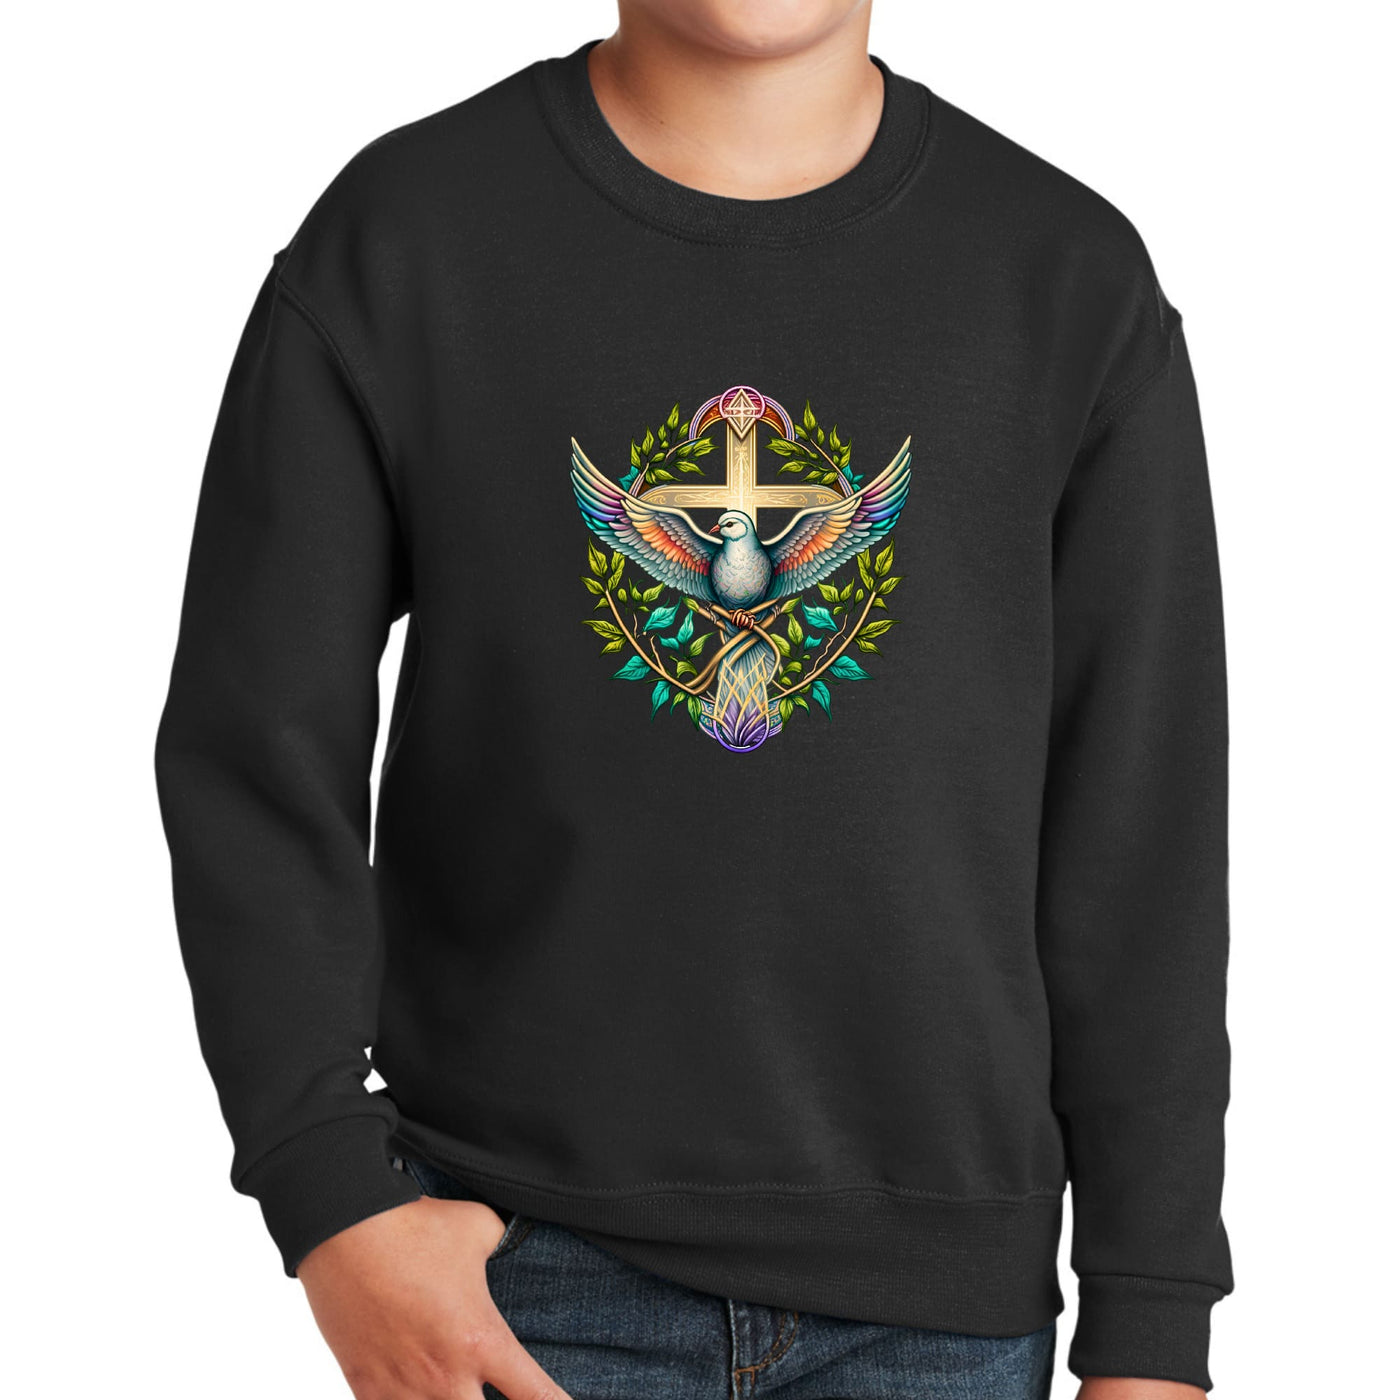 Youth Graphic Sweatshirt Blue Green Multicolor Dove Floral - Youth | Sweatshirts